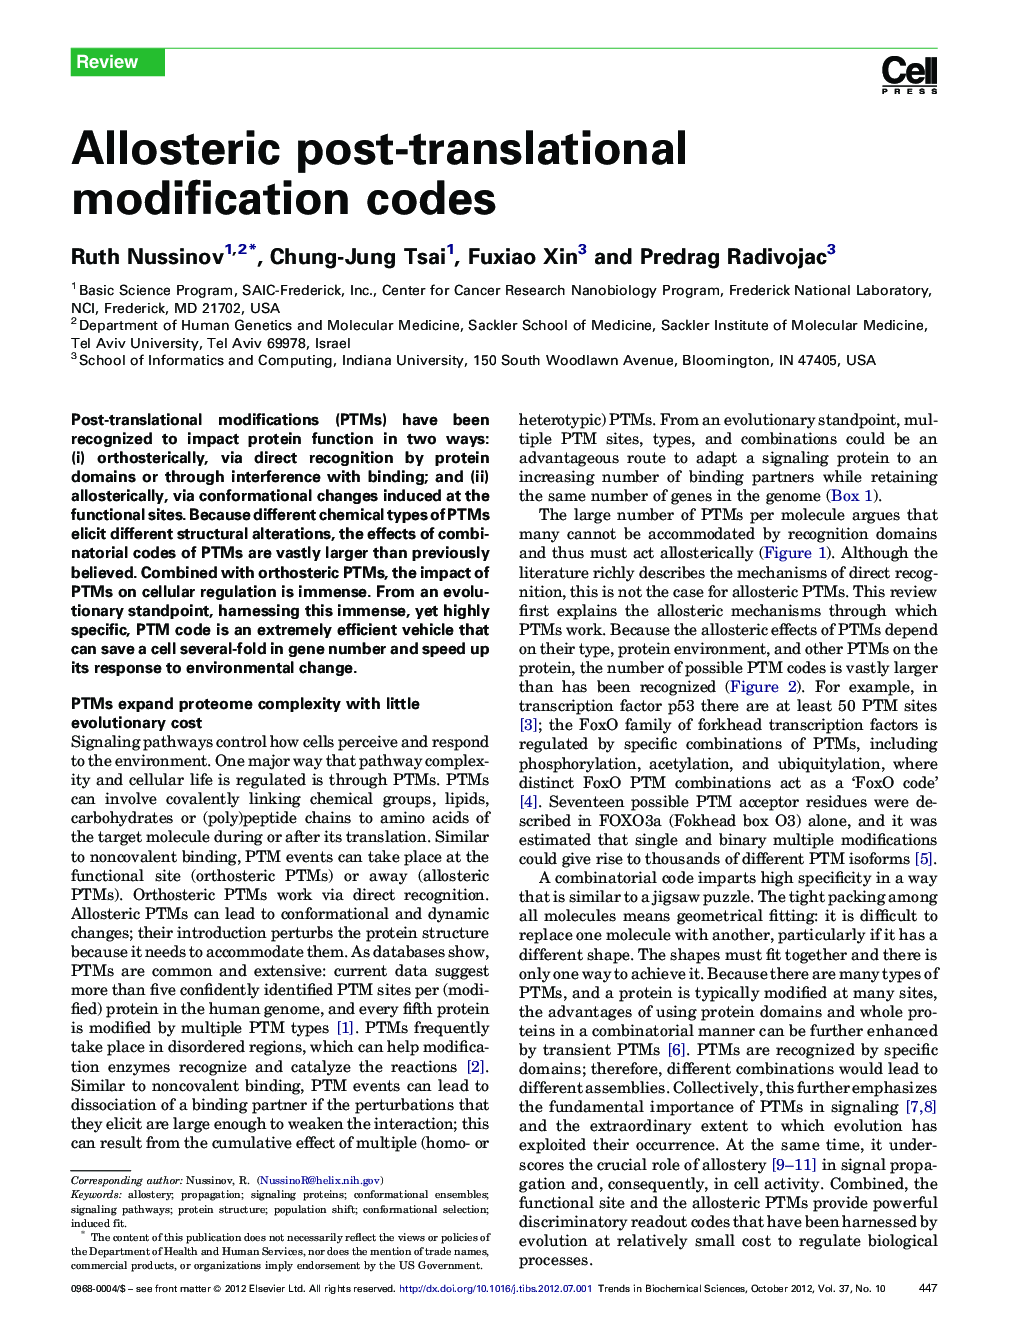 Allosteric post-translational modification codes